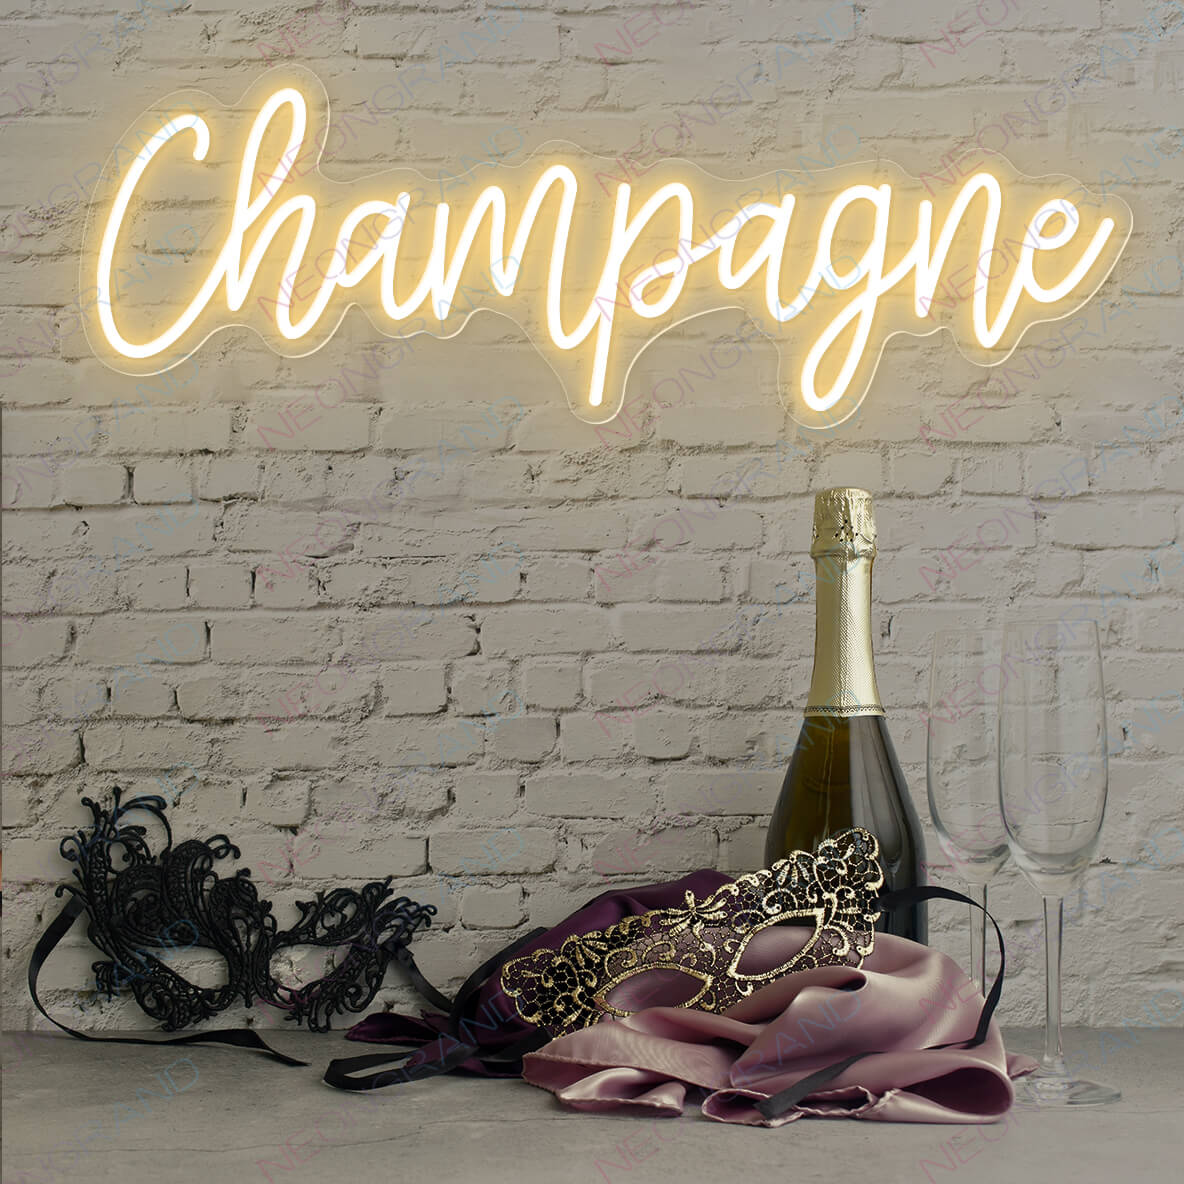 Champagne Neon Sign gold yellow